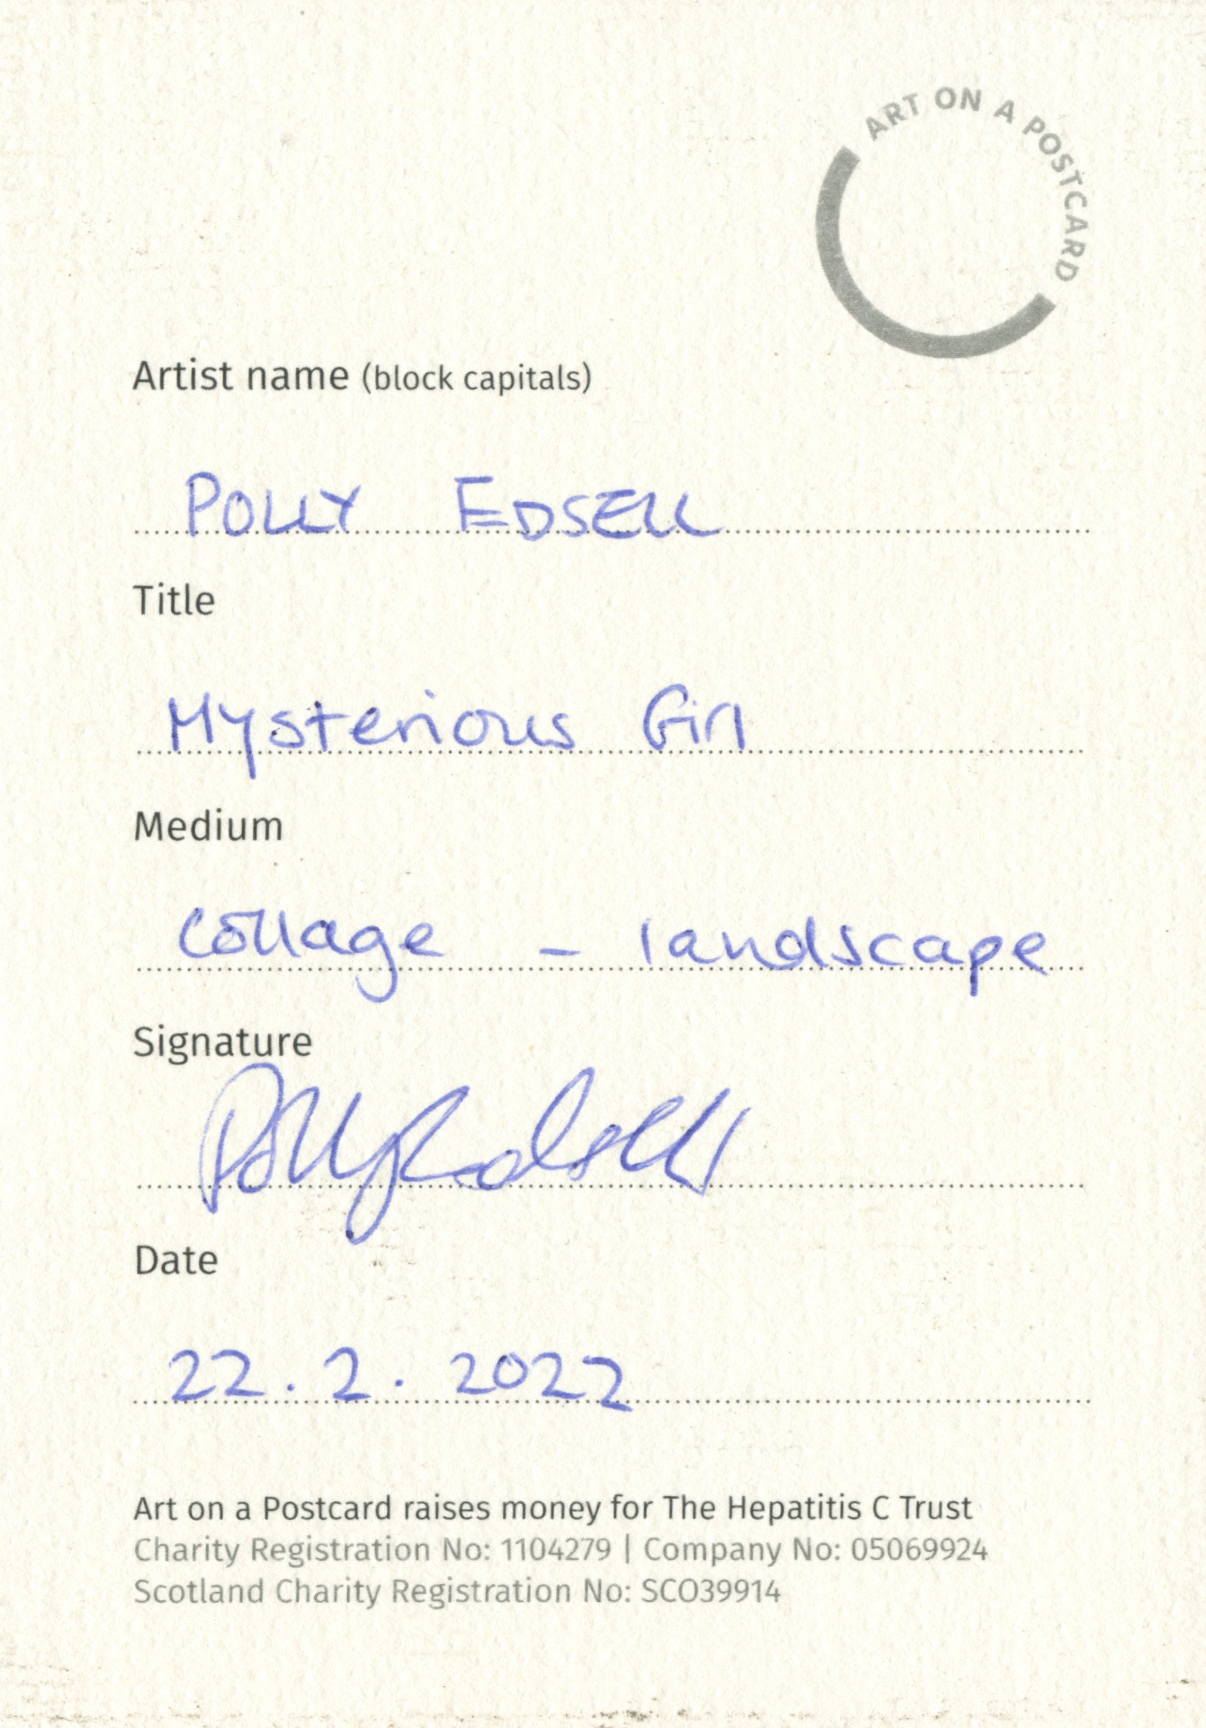 15. Polly Edsell - Mysterious Girl - BACK